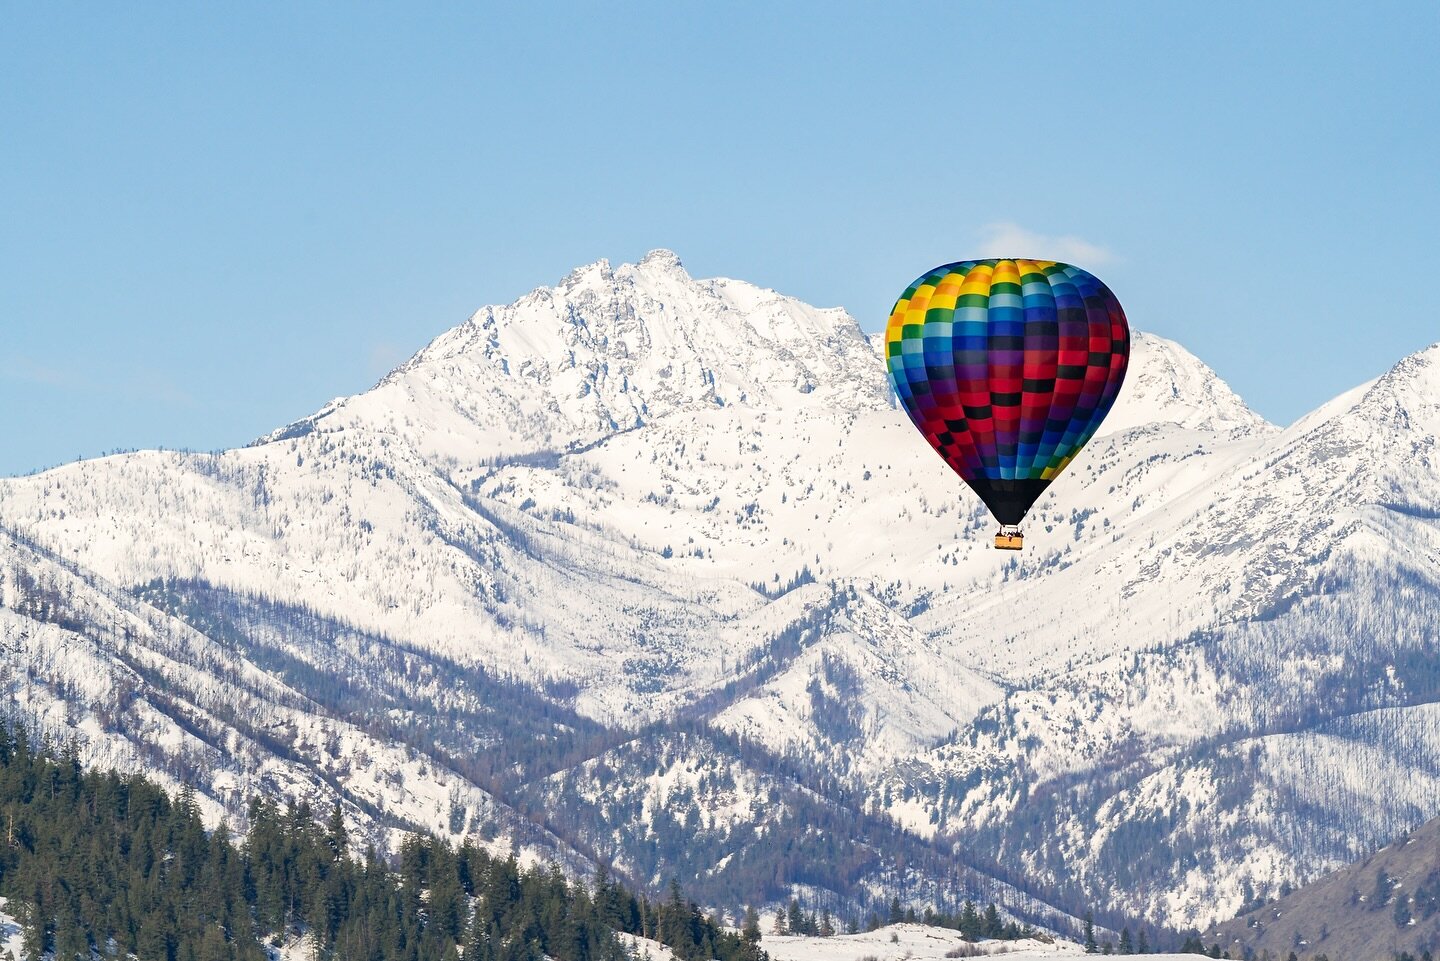 Wishing I were at the Winthrop Balloon Roundup this weekend.  It is so beautiful to see the brightly colored balloons against the snow covered North Cascades. 

Winthrop Balloon Roundup 2022

#winthrop #winthropballoonroundup #methowvalley #hotairbal